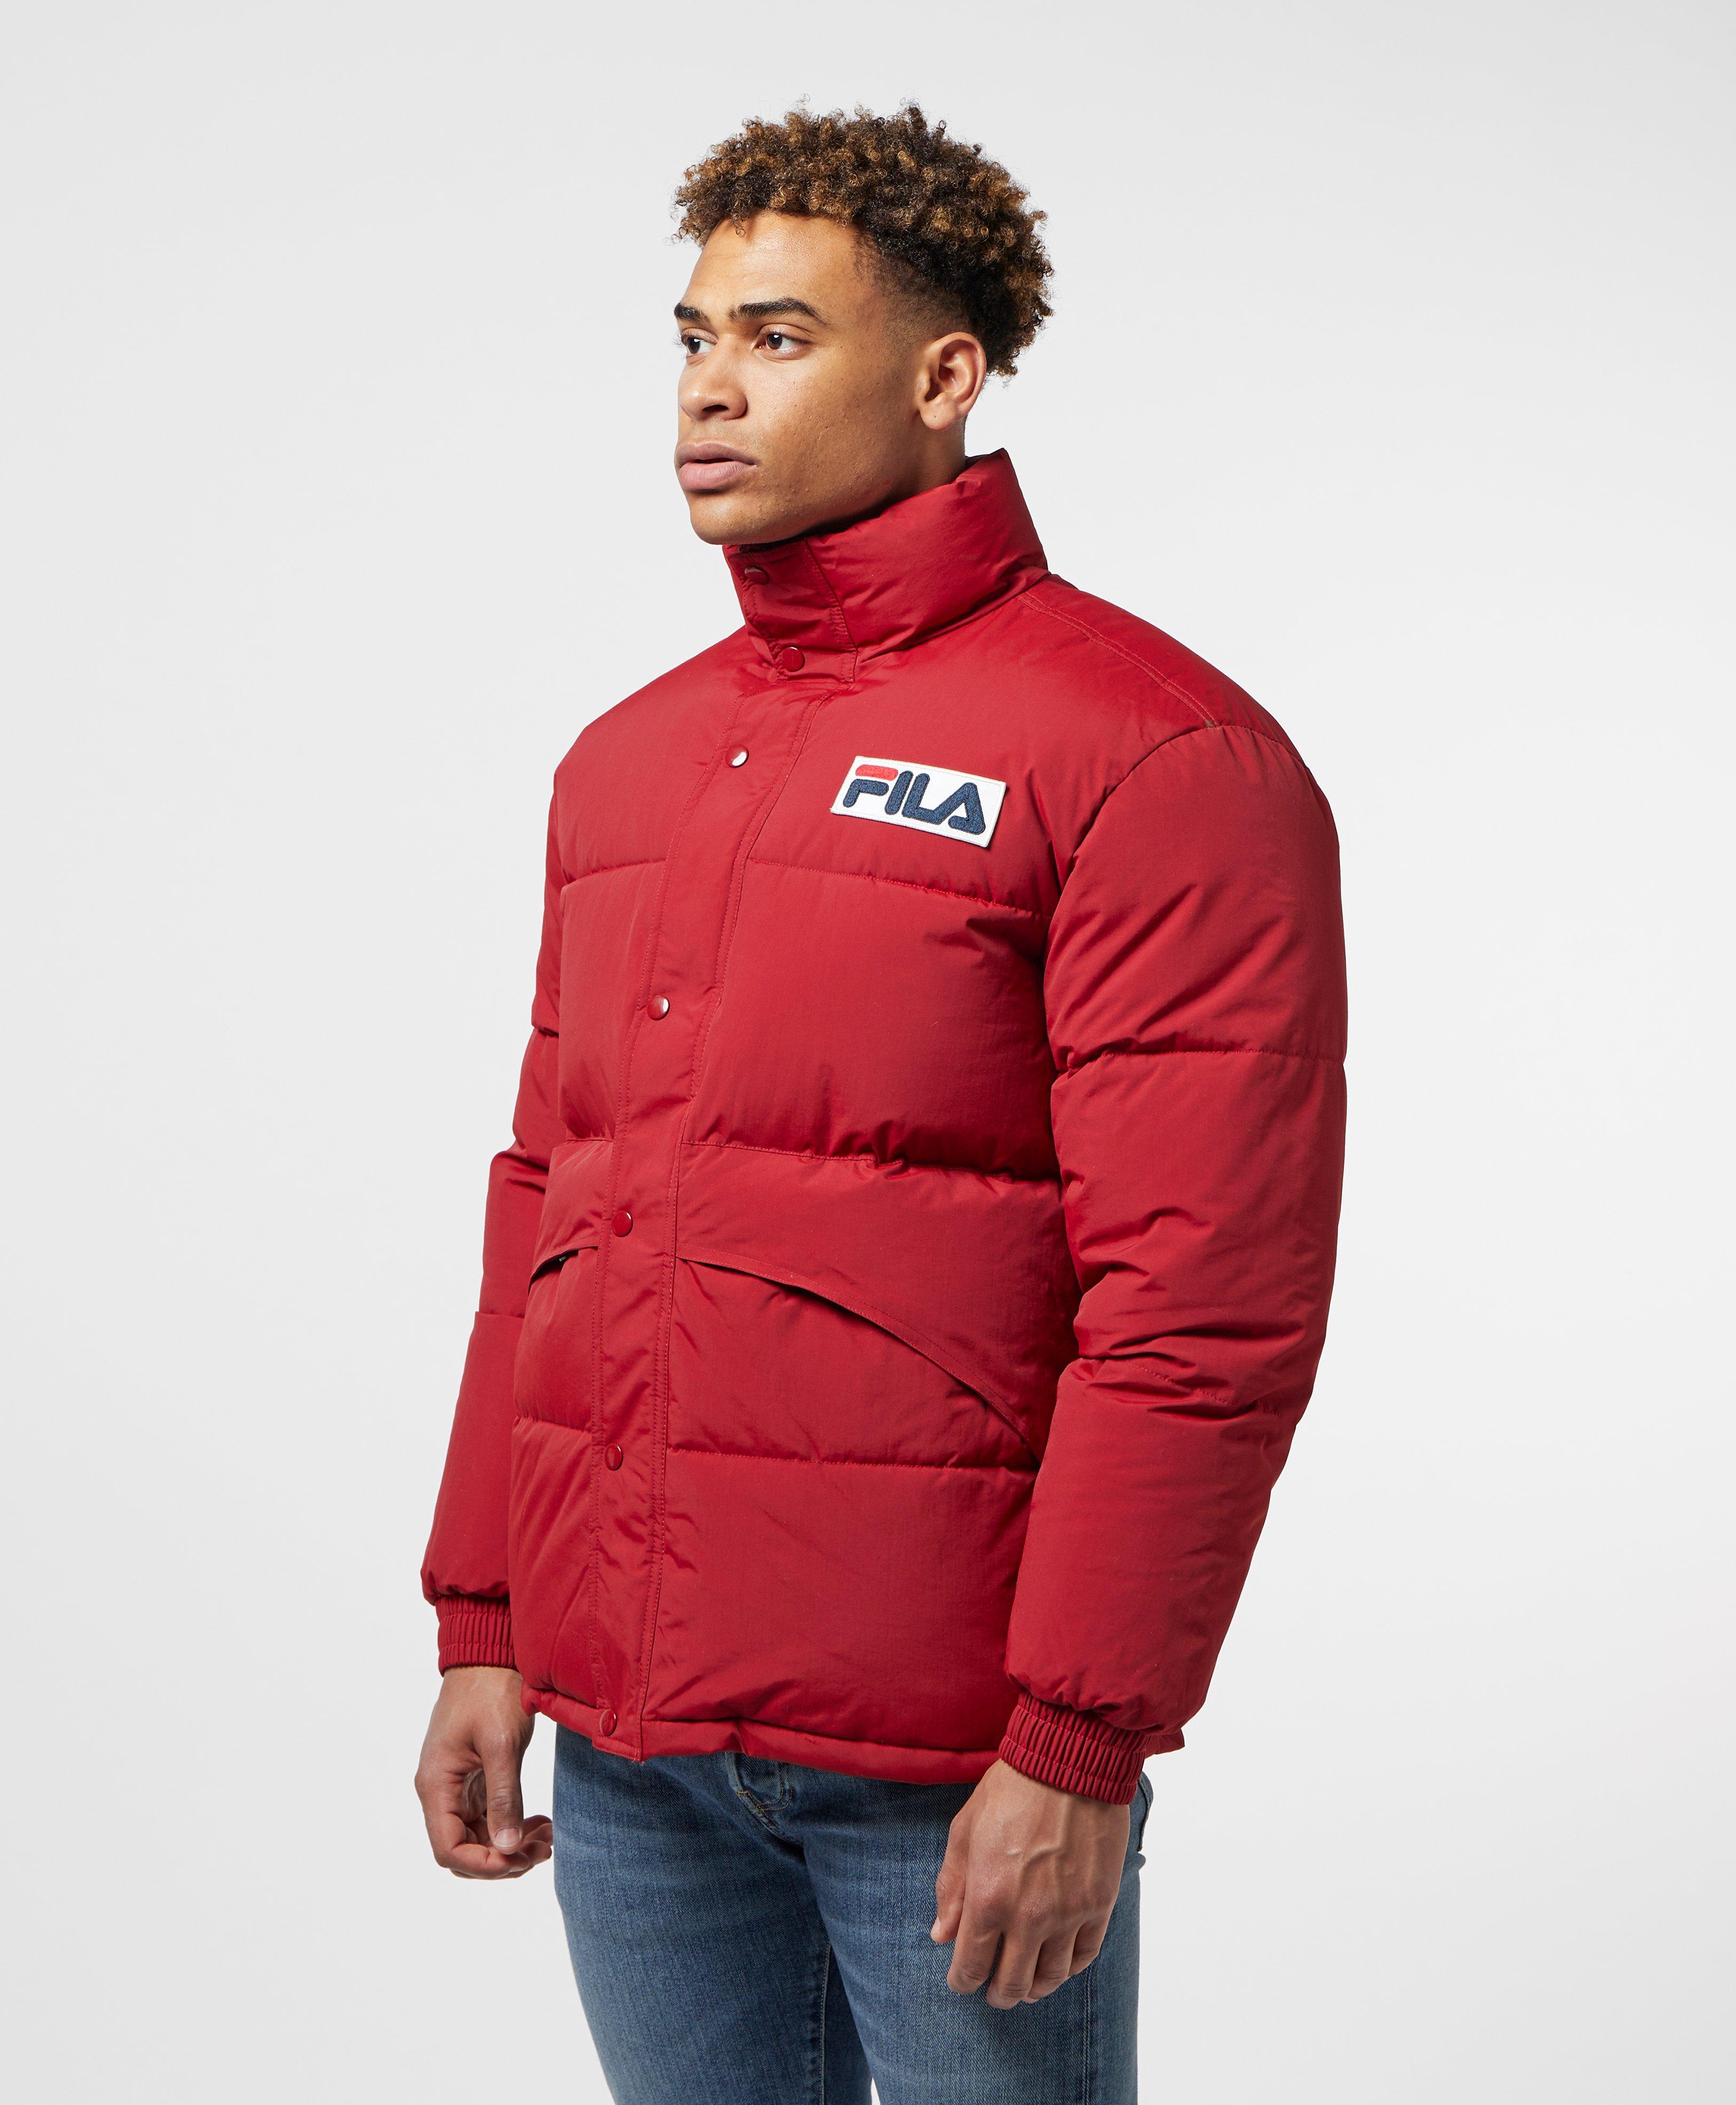 Fila Synthetic Nanga Jacket in Red for Men - Lyst